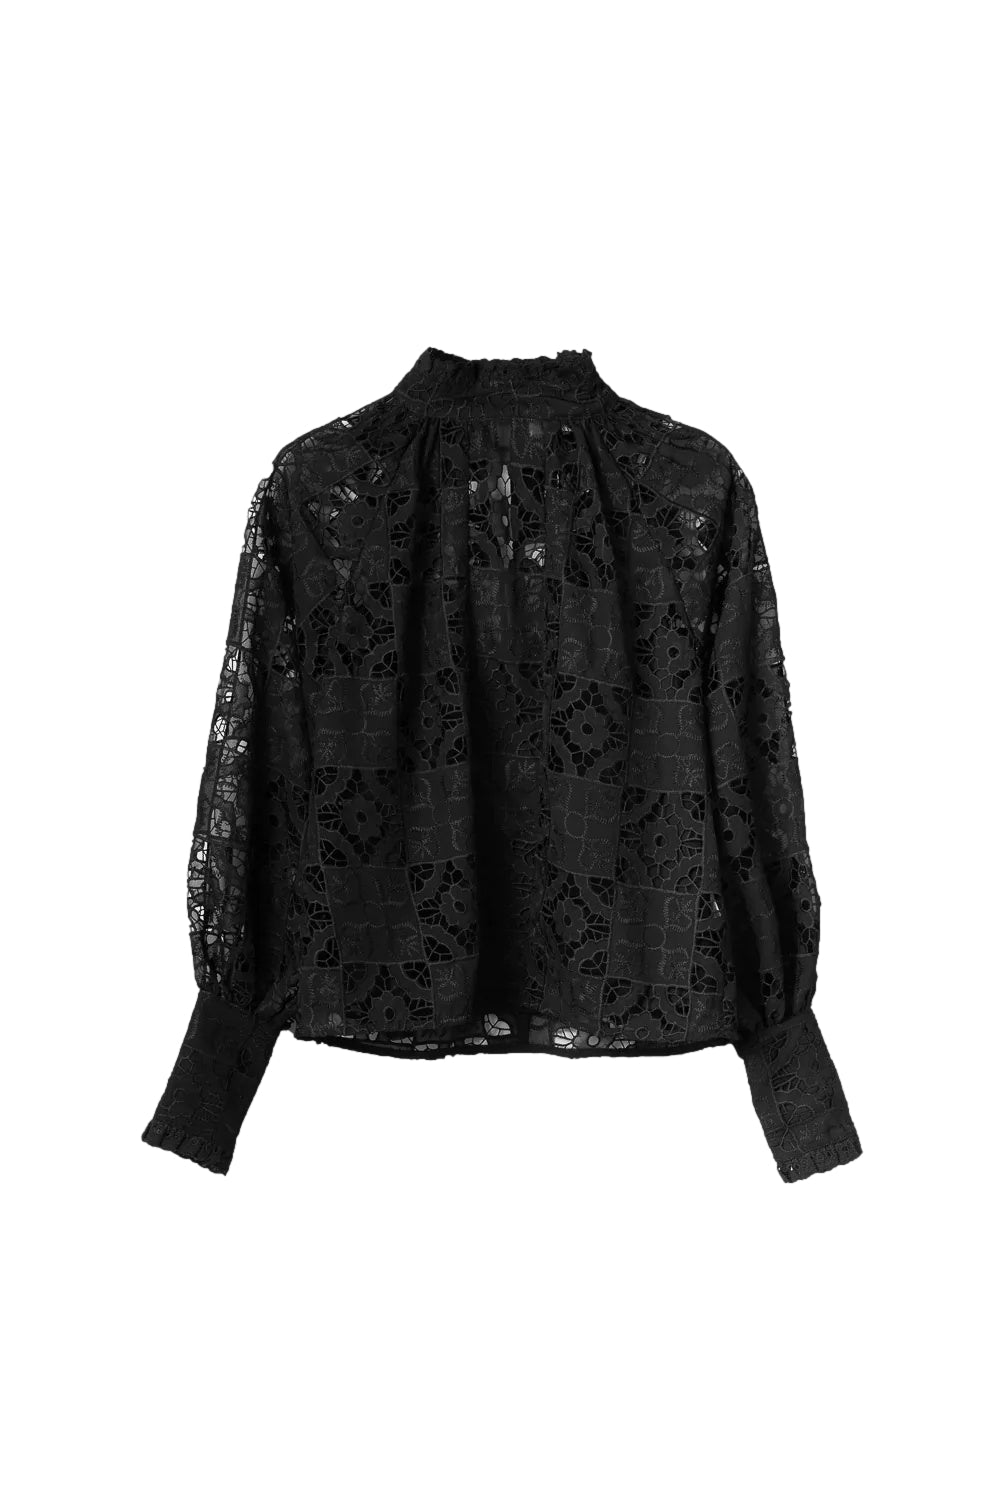 FWSS Broderie Anglaise Top Topp Sort - [modostore.no]